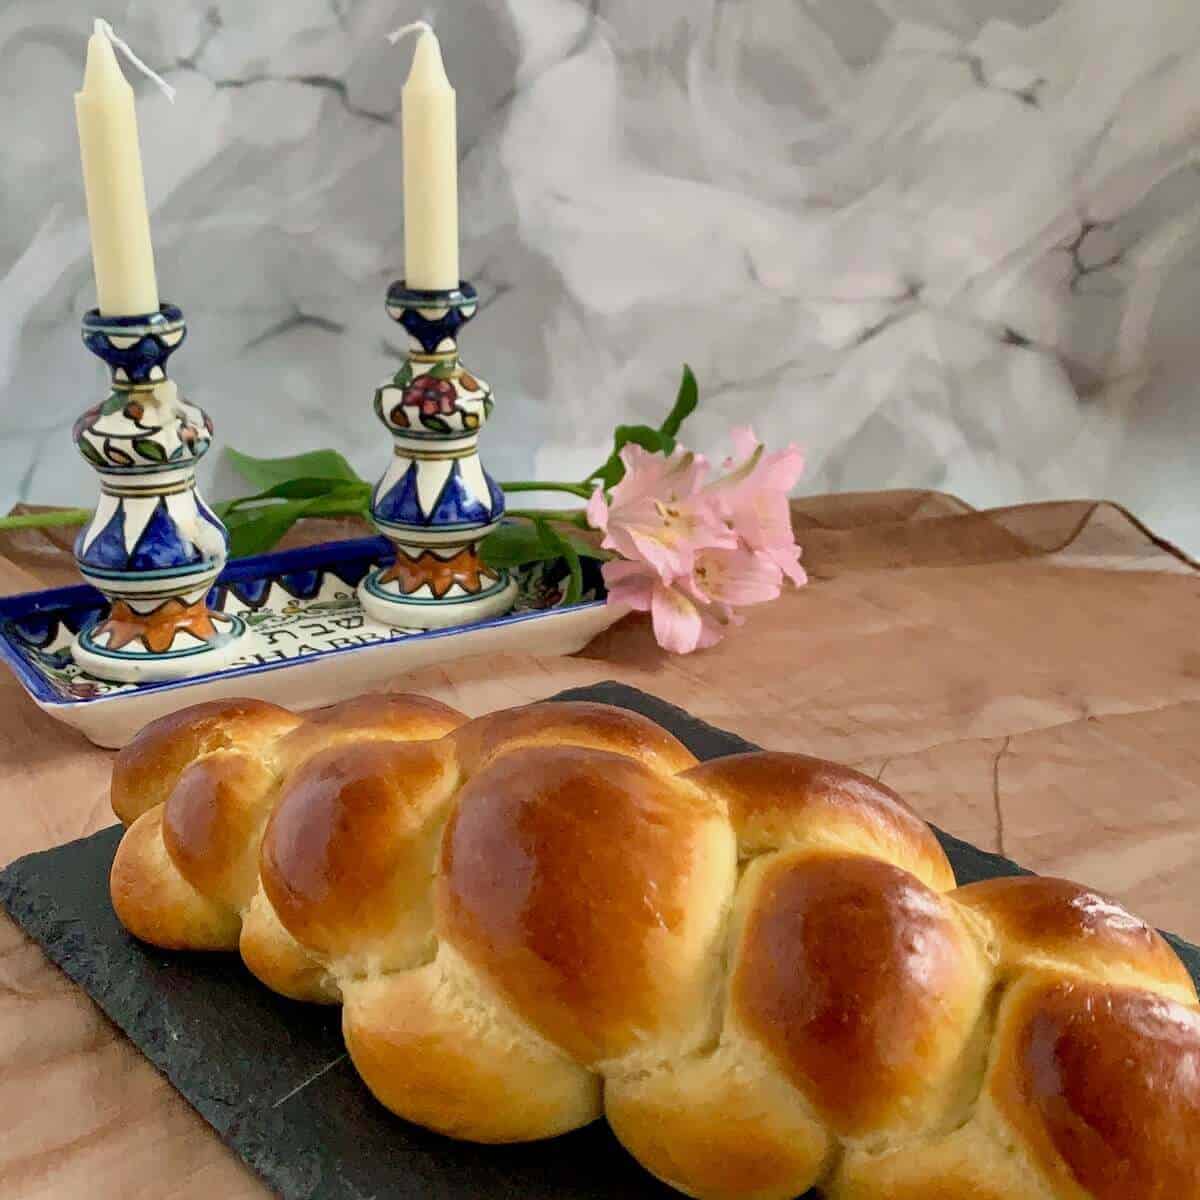 Oblong challah on a black slate with Shabbat candles in the background.